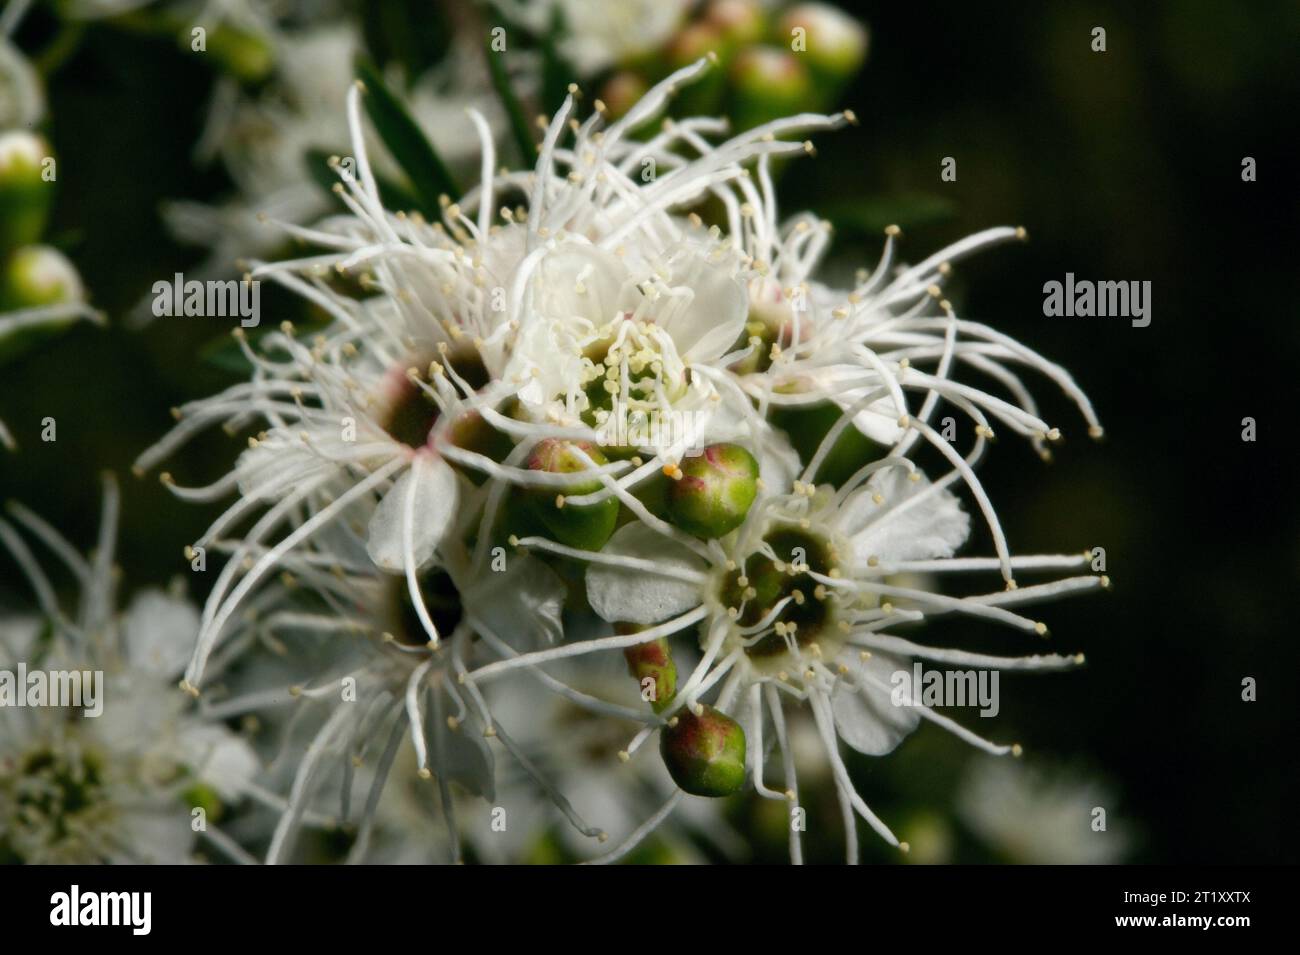 Burgan (Kunzea Ericoides) is an inconspicuous small tree - until it flowers! The long stamens make it easy to identify, and popular with insects. Stock Photo